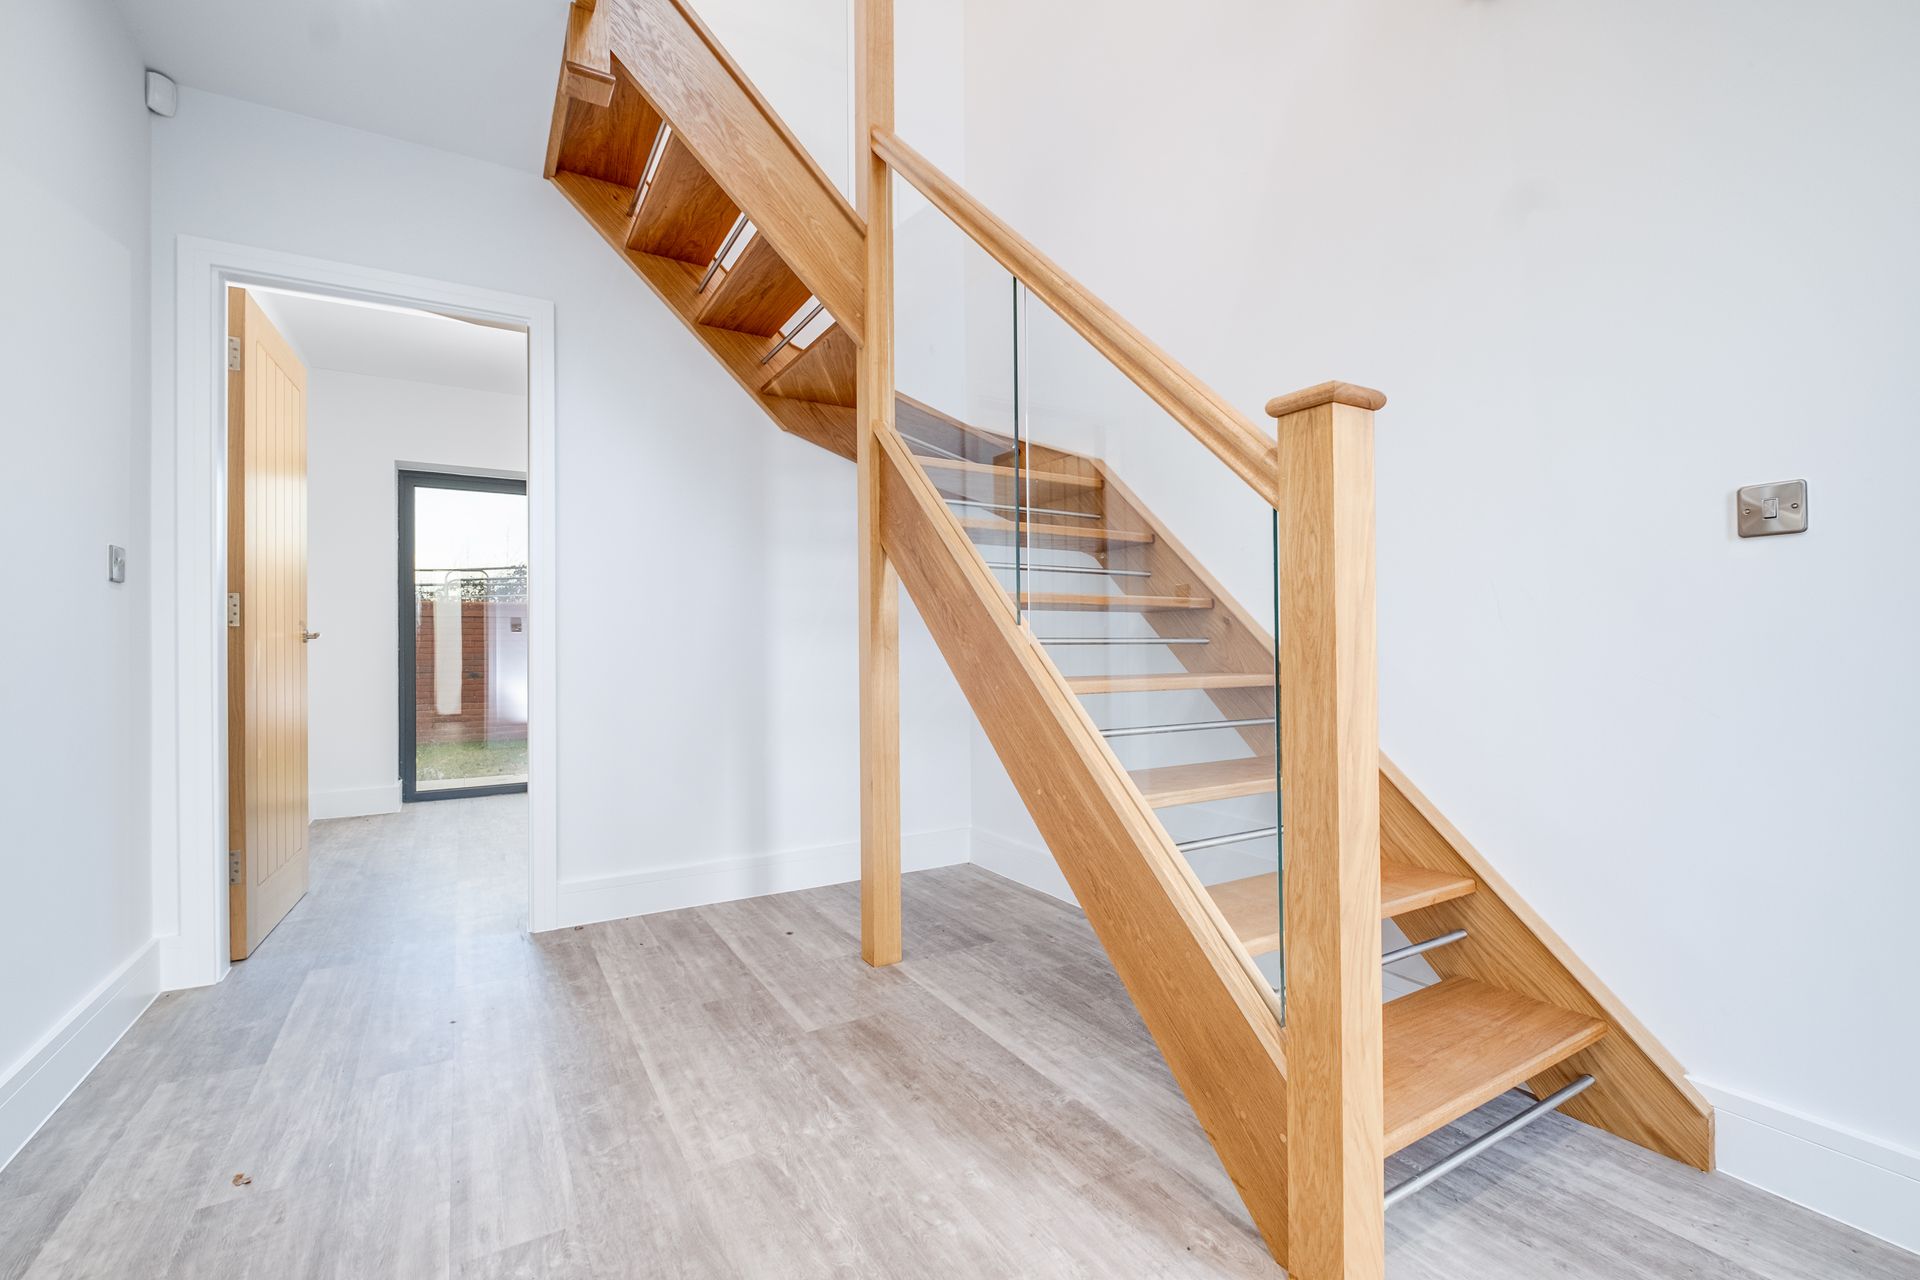 Open tread staircase with glass balustrade